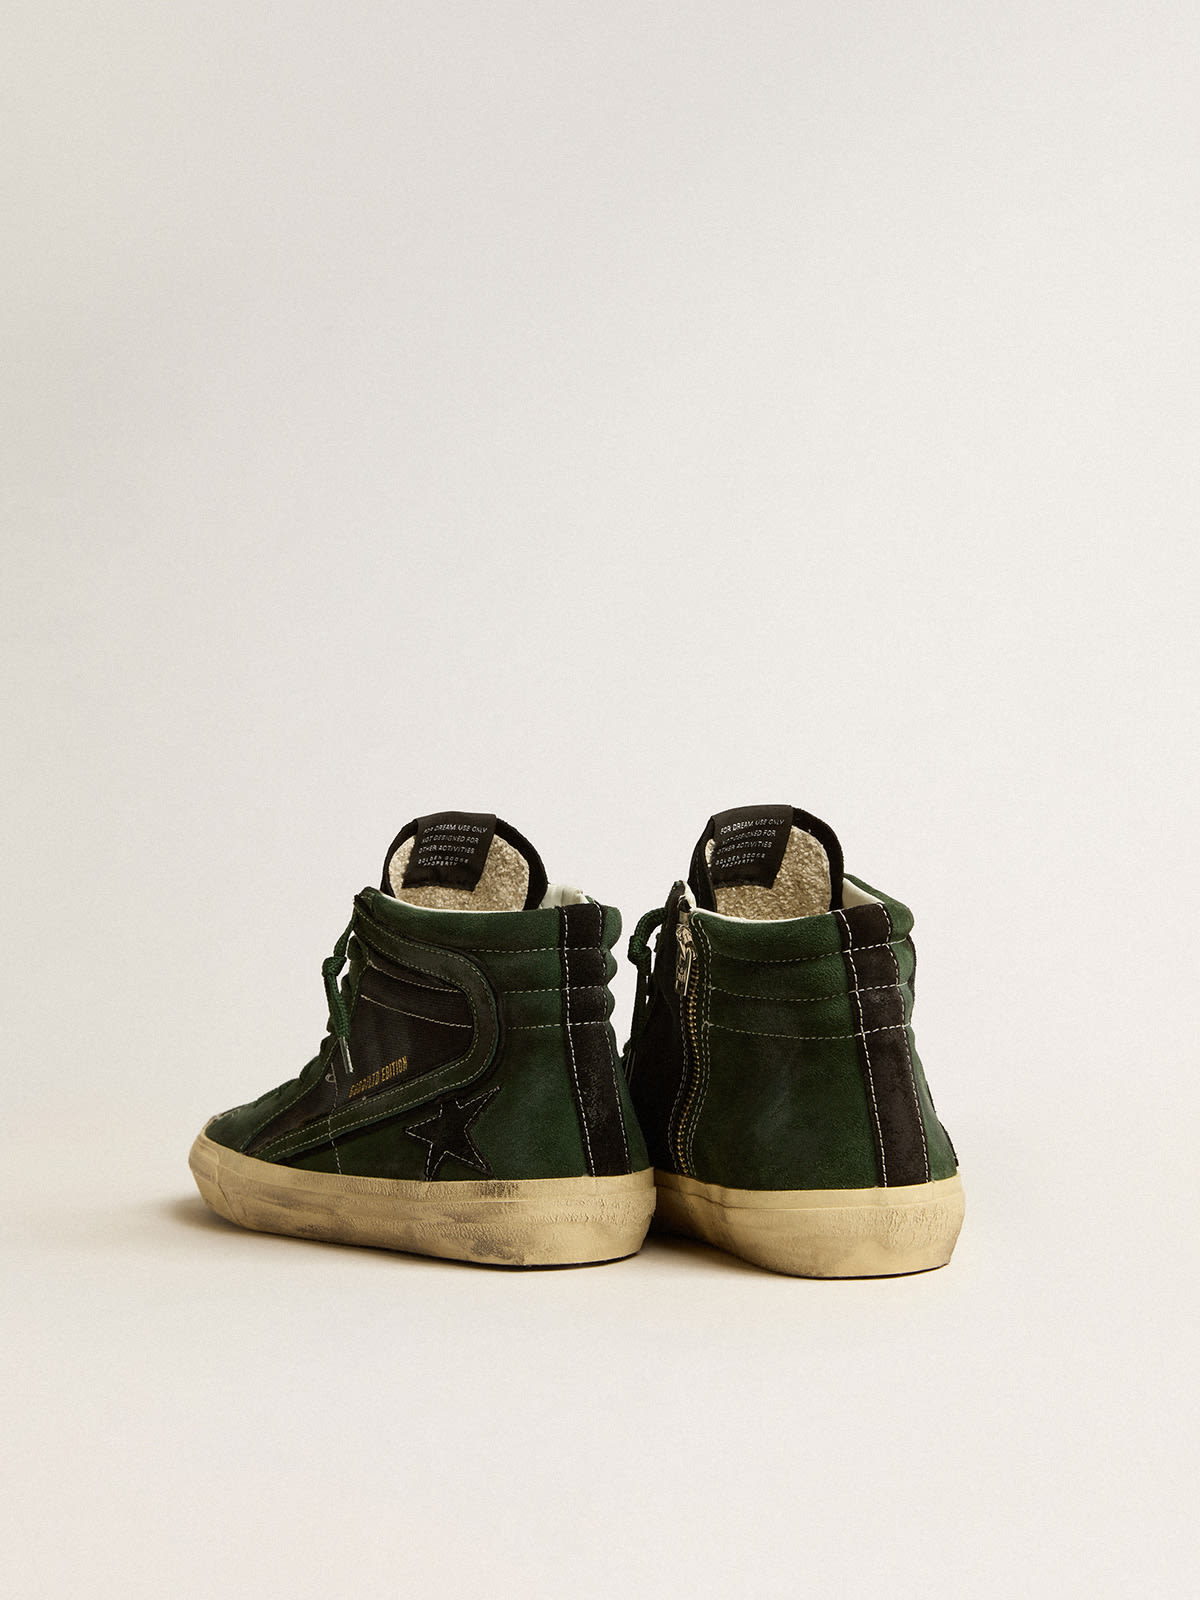 Golden Goose - Slide LTD in green suede and black canvas with suede star and flash in 